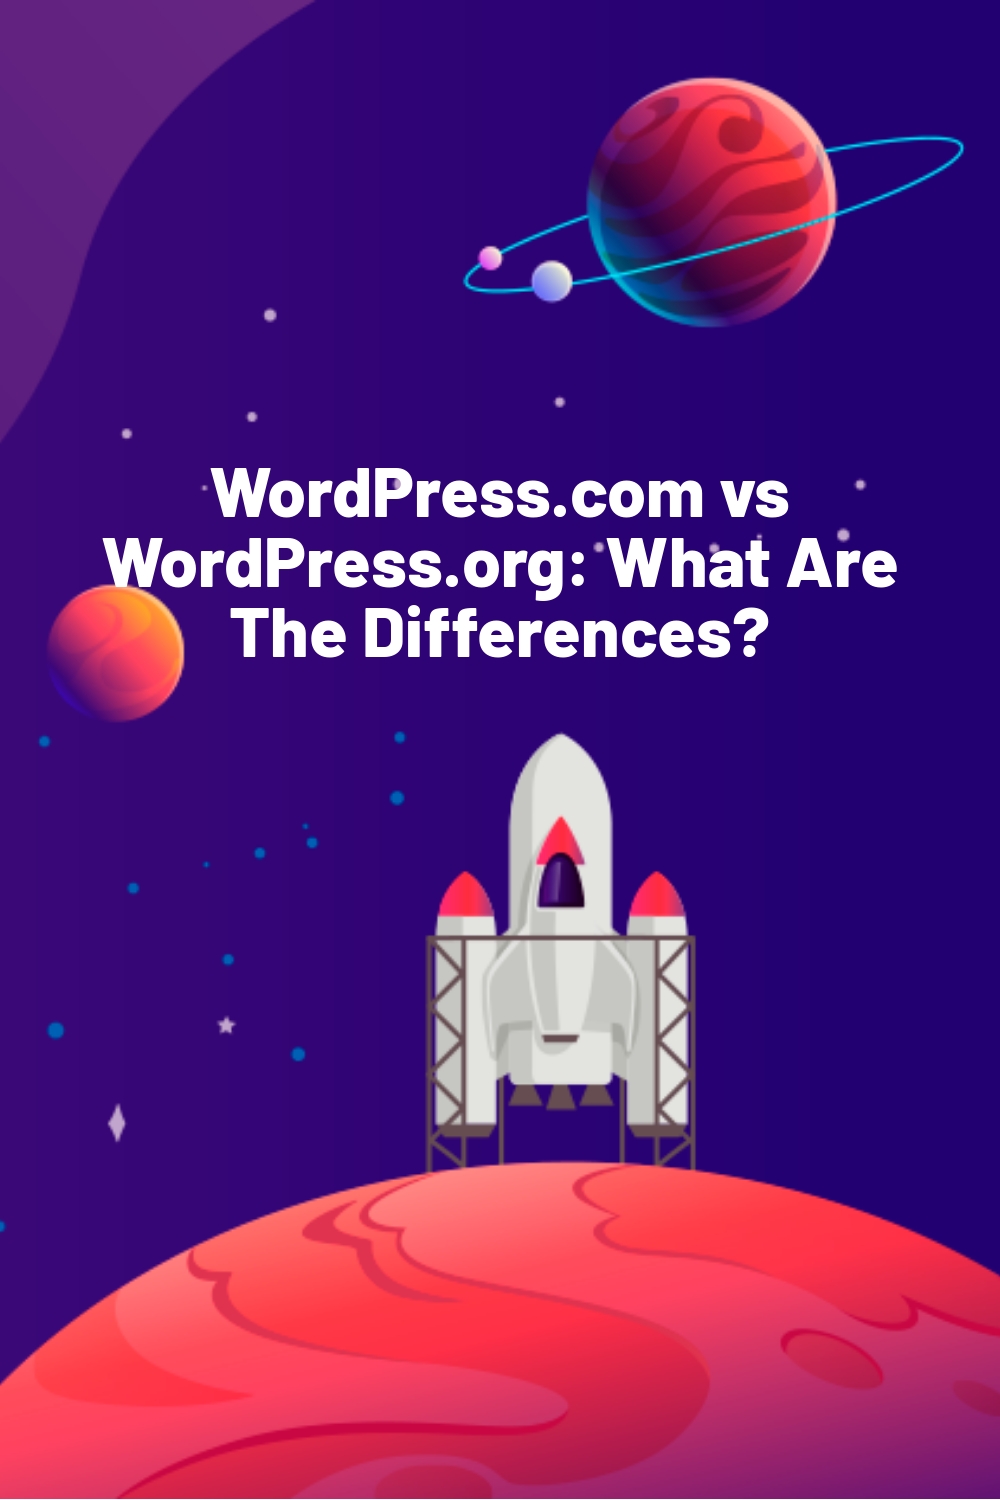 WordPress.com vs WordPress.org: What Are The Differences?